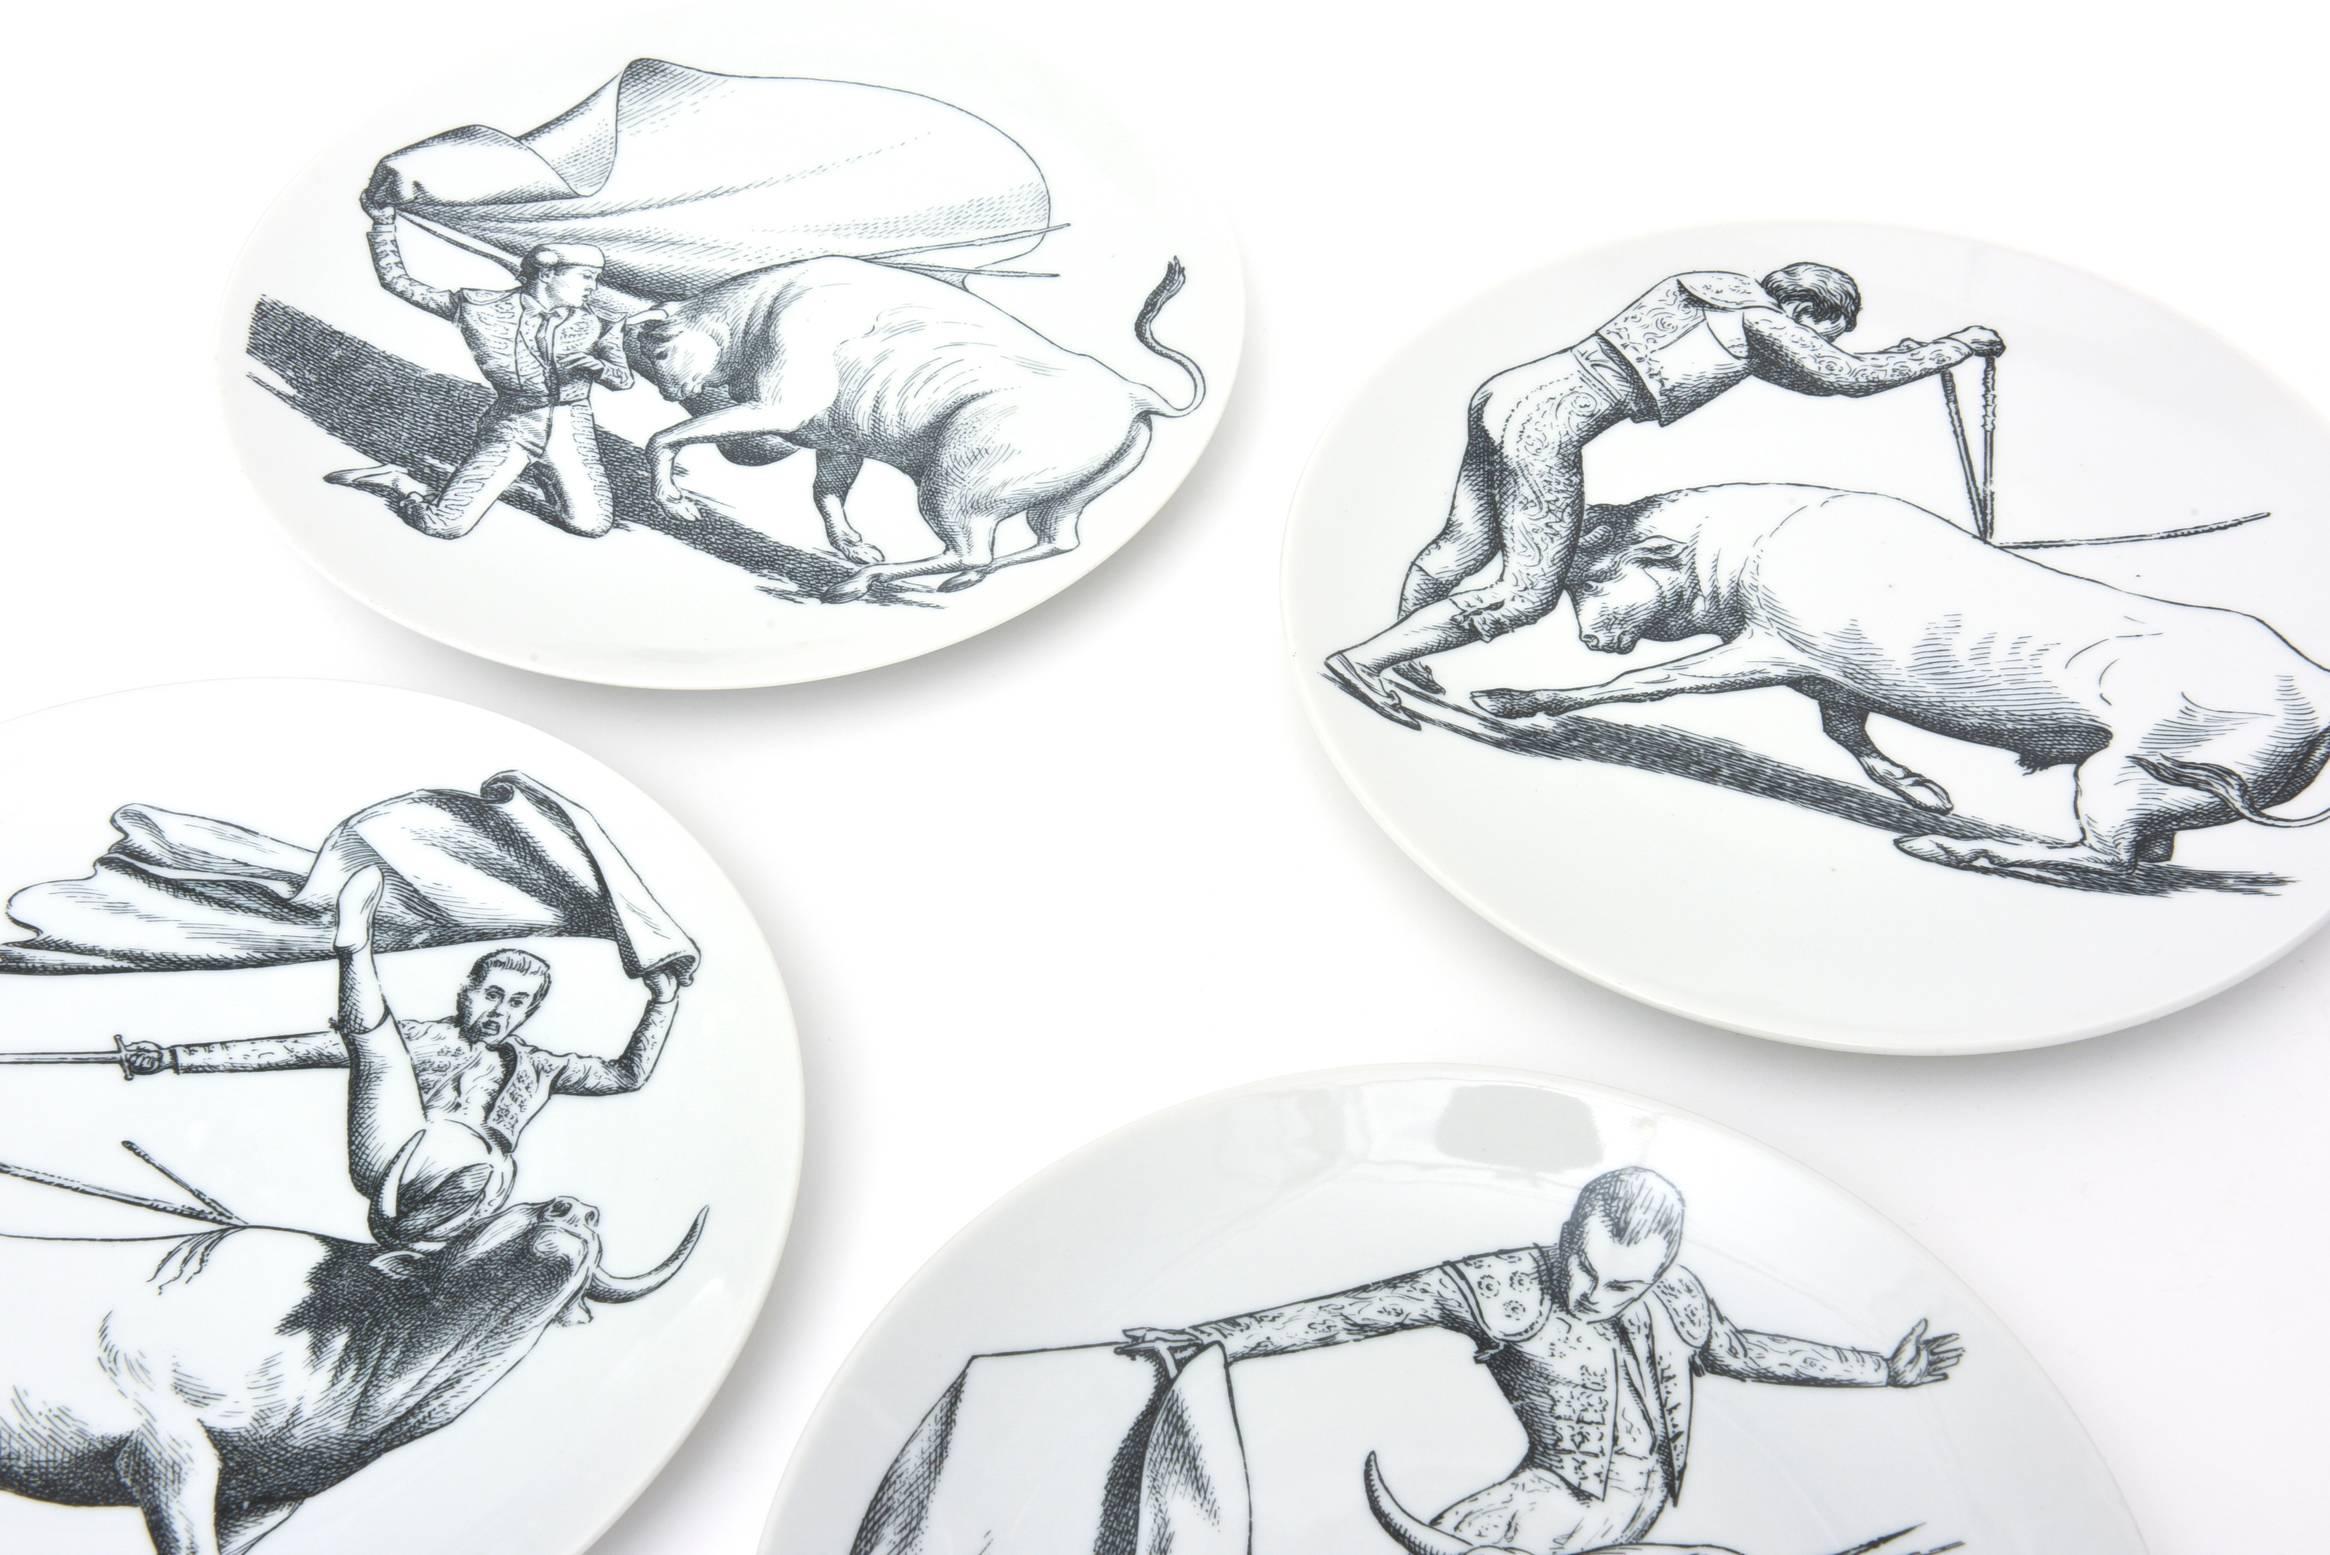 These wonderful hard to find and hard to come by complete set of RARE wonderful bullfight black and white vintage Mid-Century Modern porcelain dinner plates are the genius work and imagination of Italian designer, master and artist: Piero